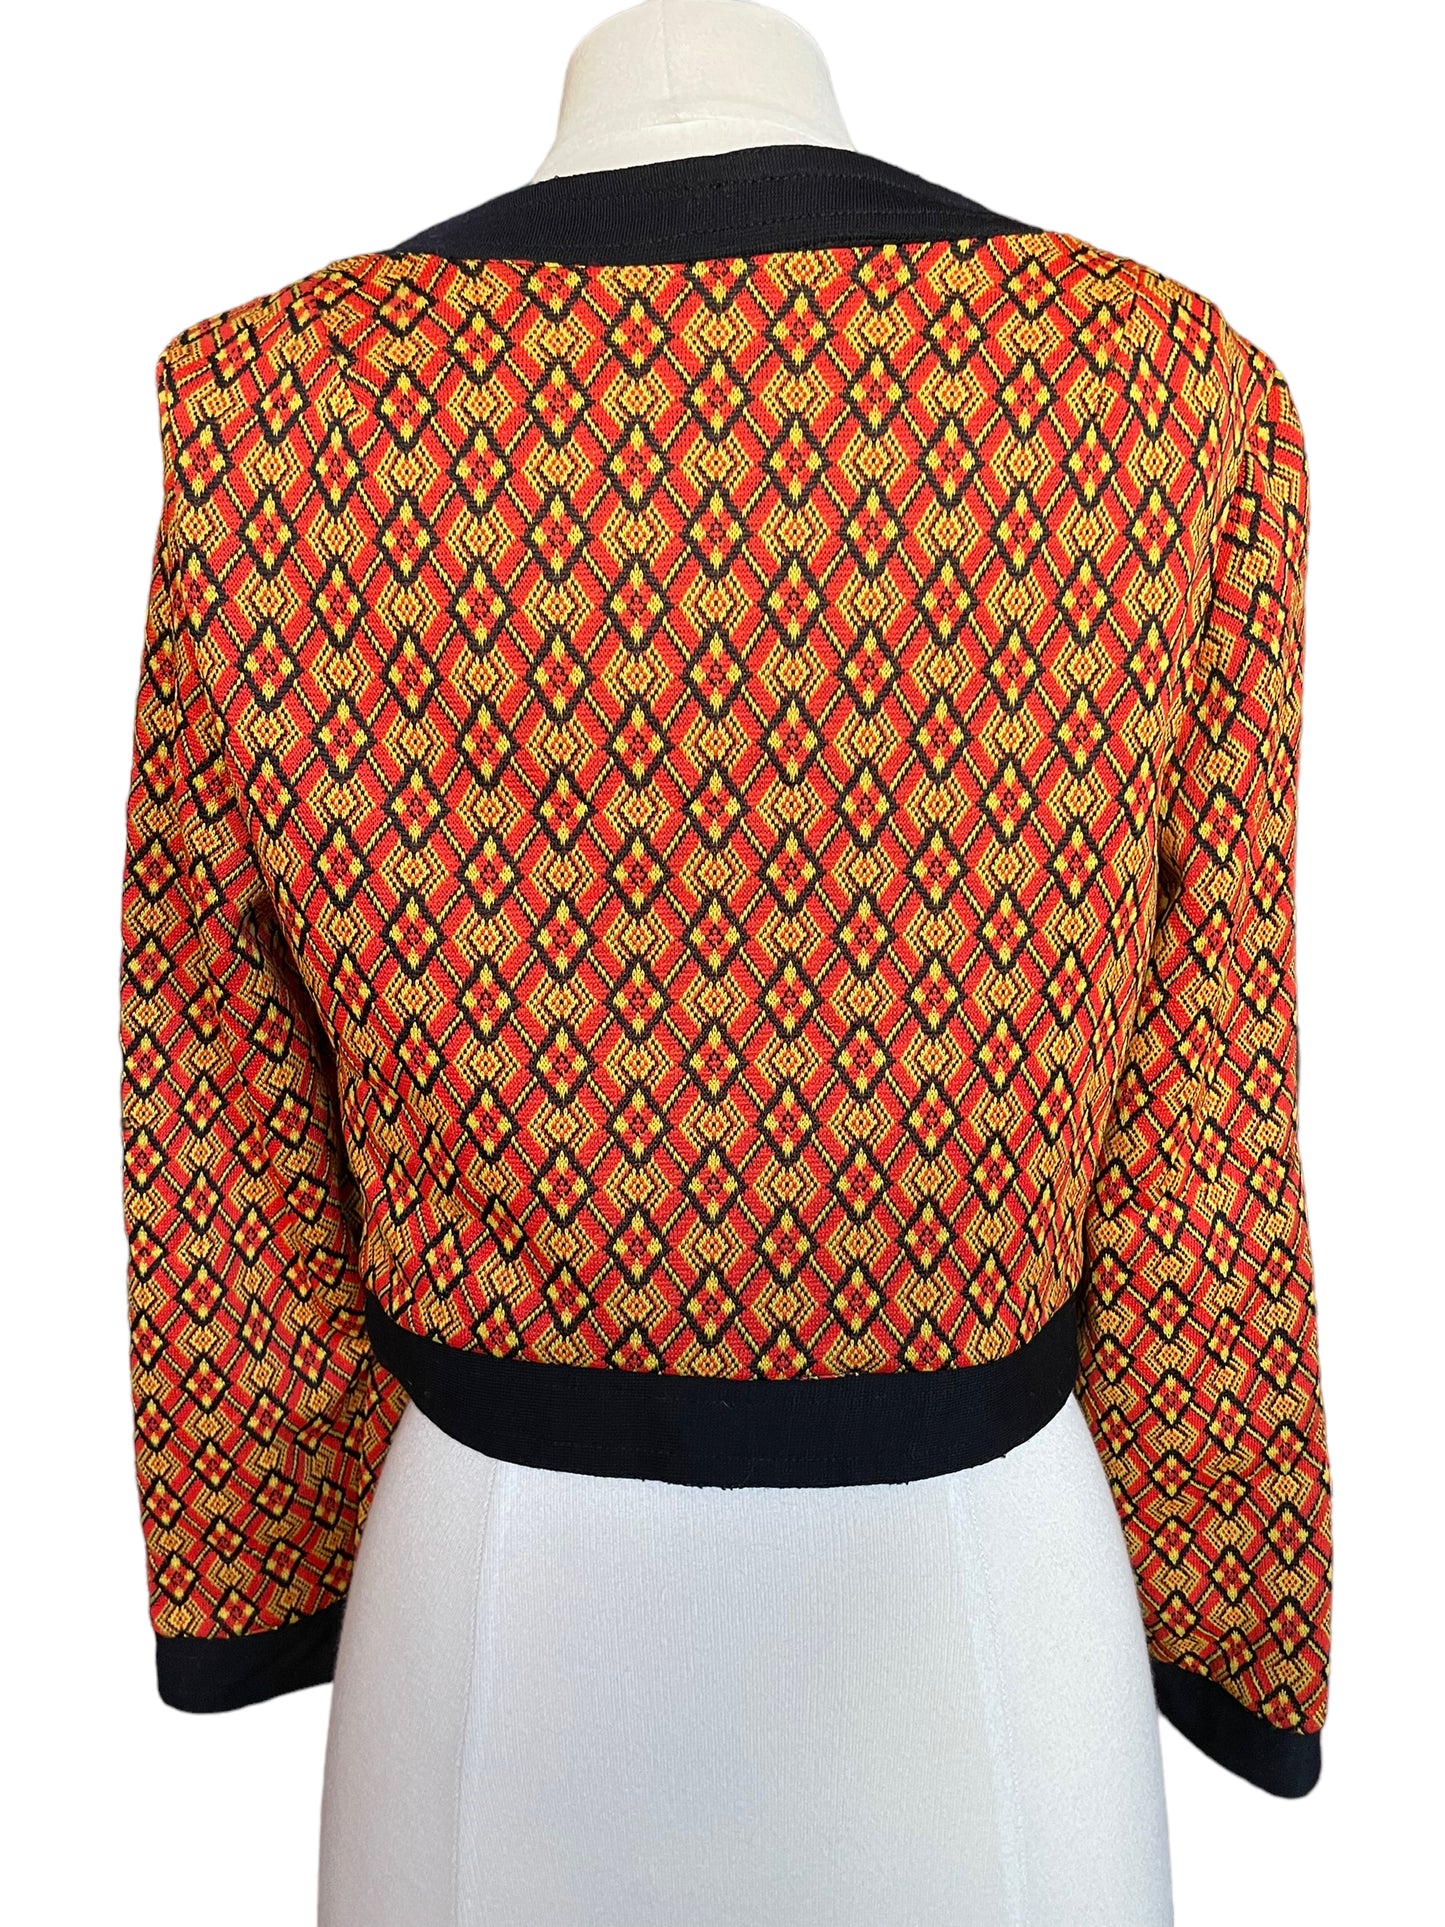 Full back view of Vintage 1960s Argyle Cropped Cardigan | Seattle Ladies Vintage | Barn Owl Sweaters